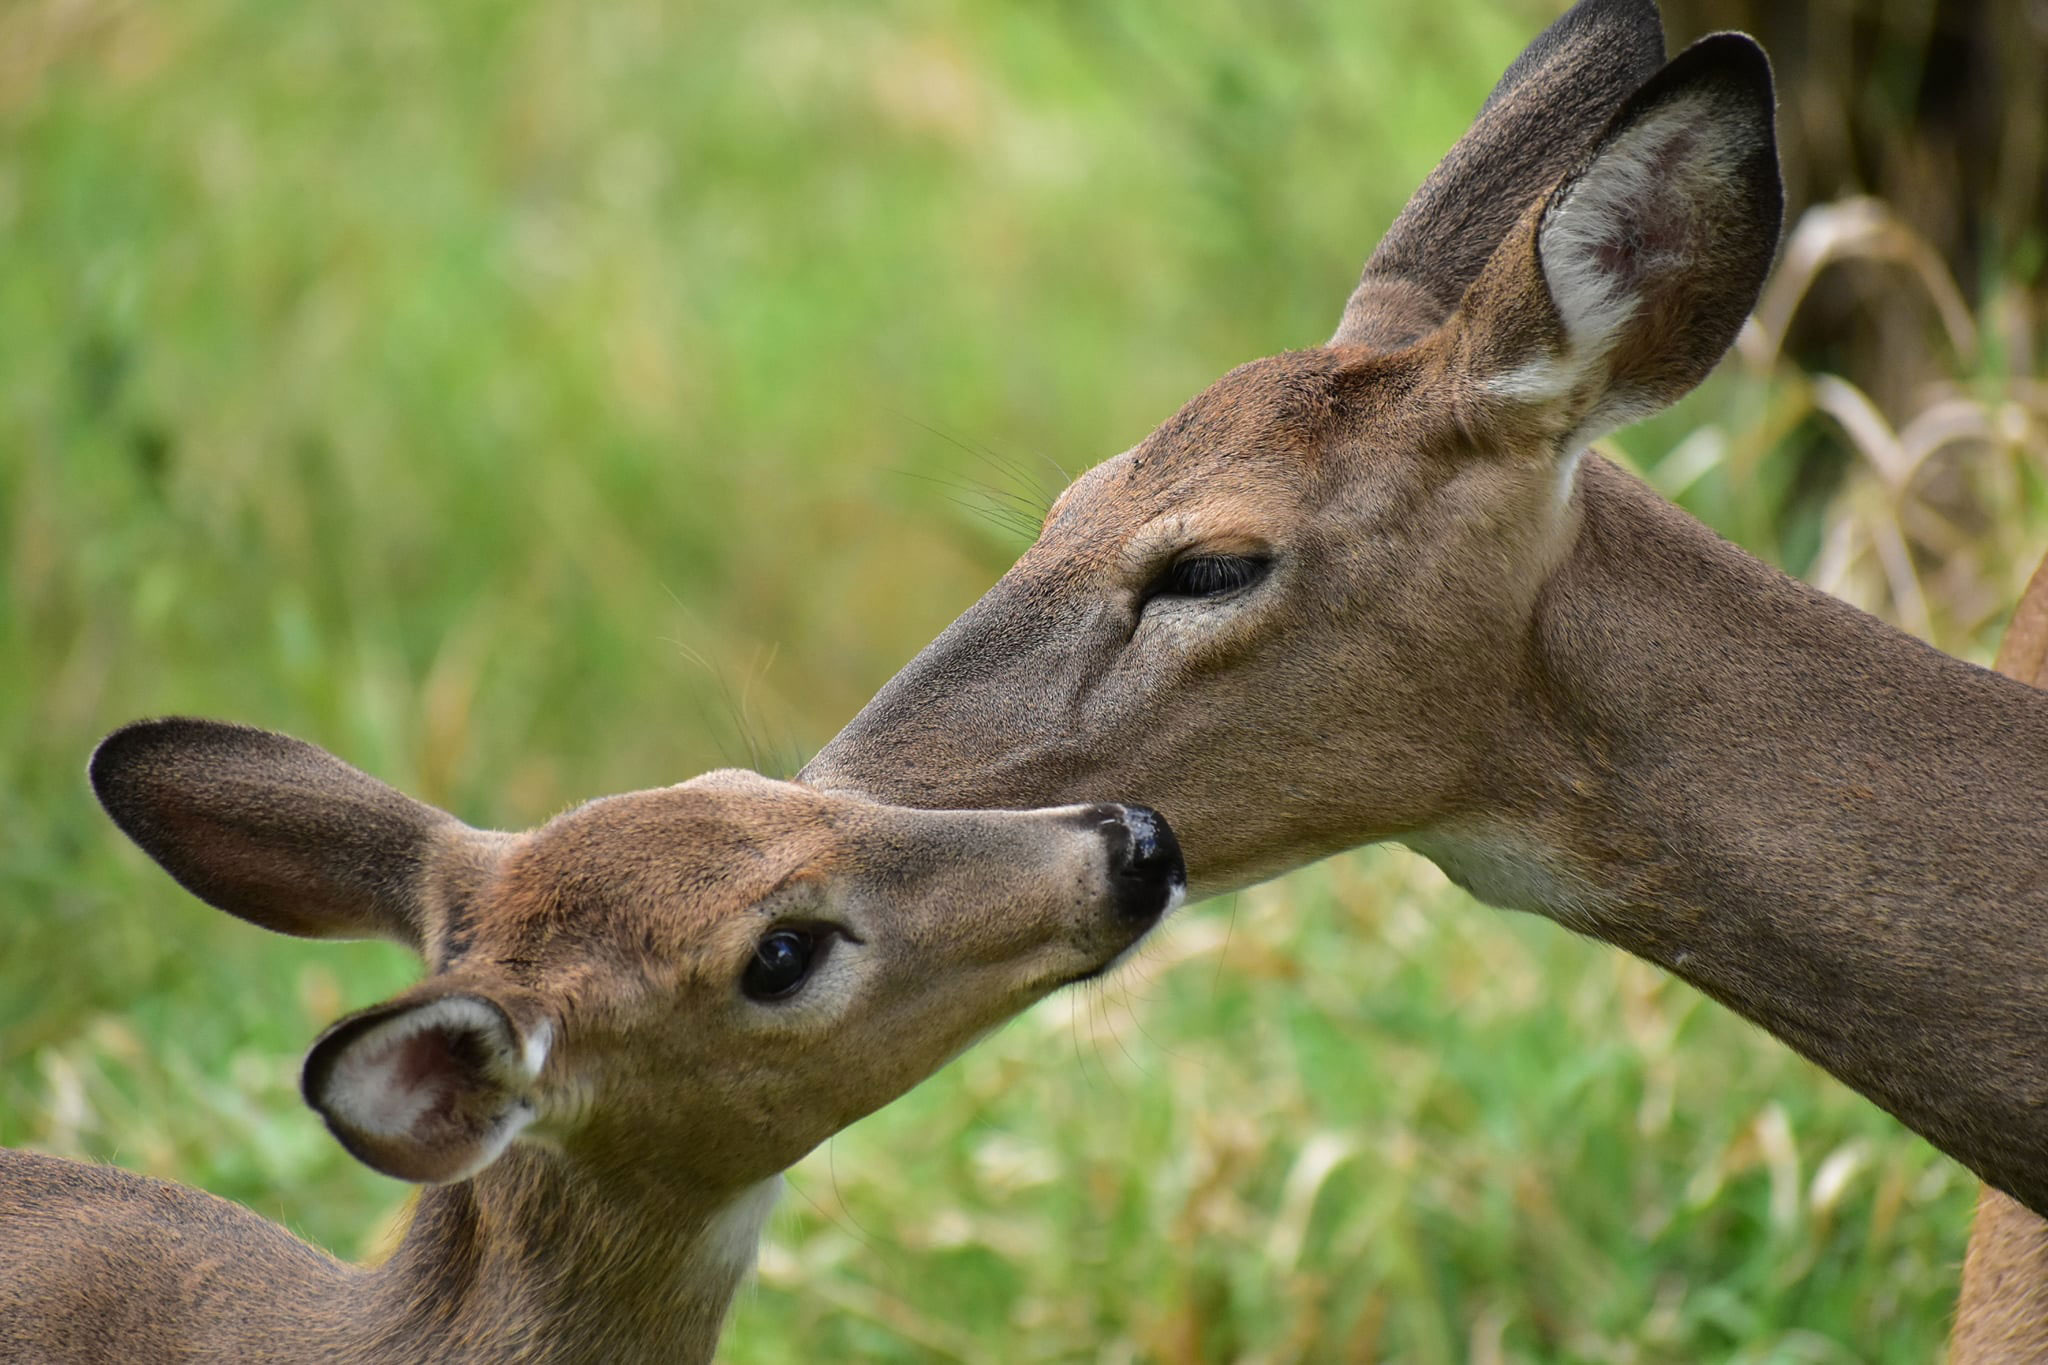 Two deer showing affection for each other.